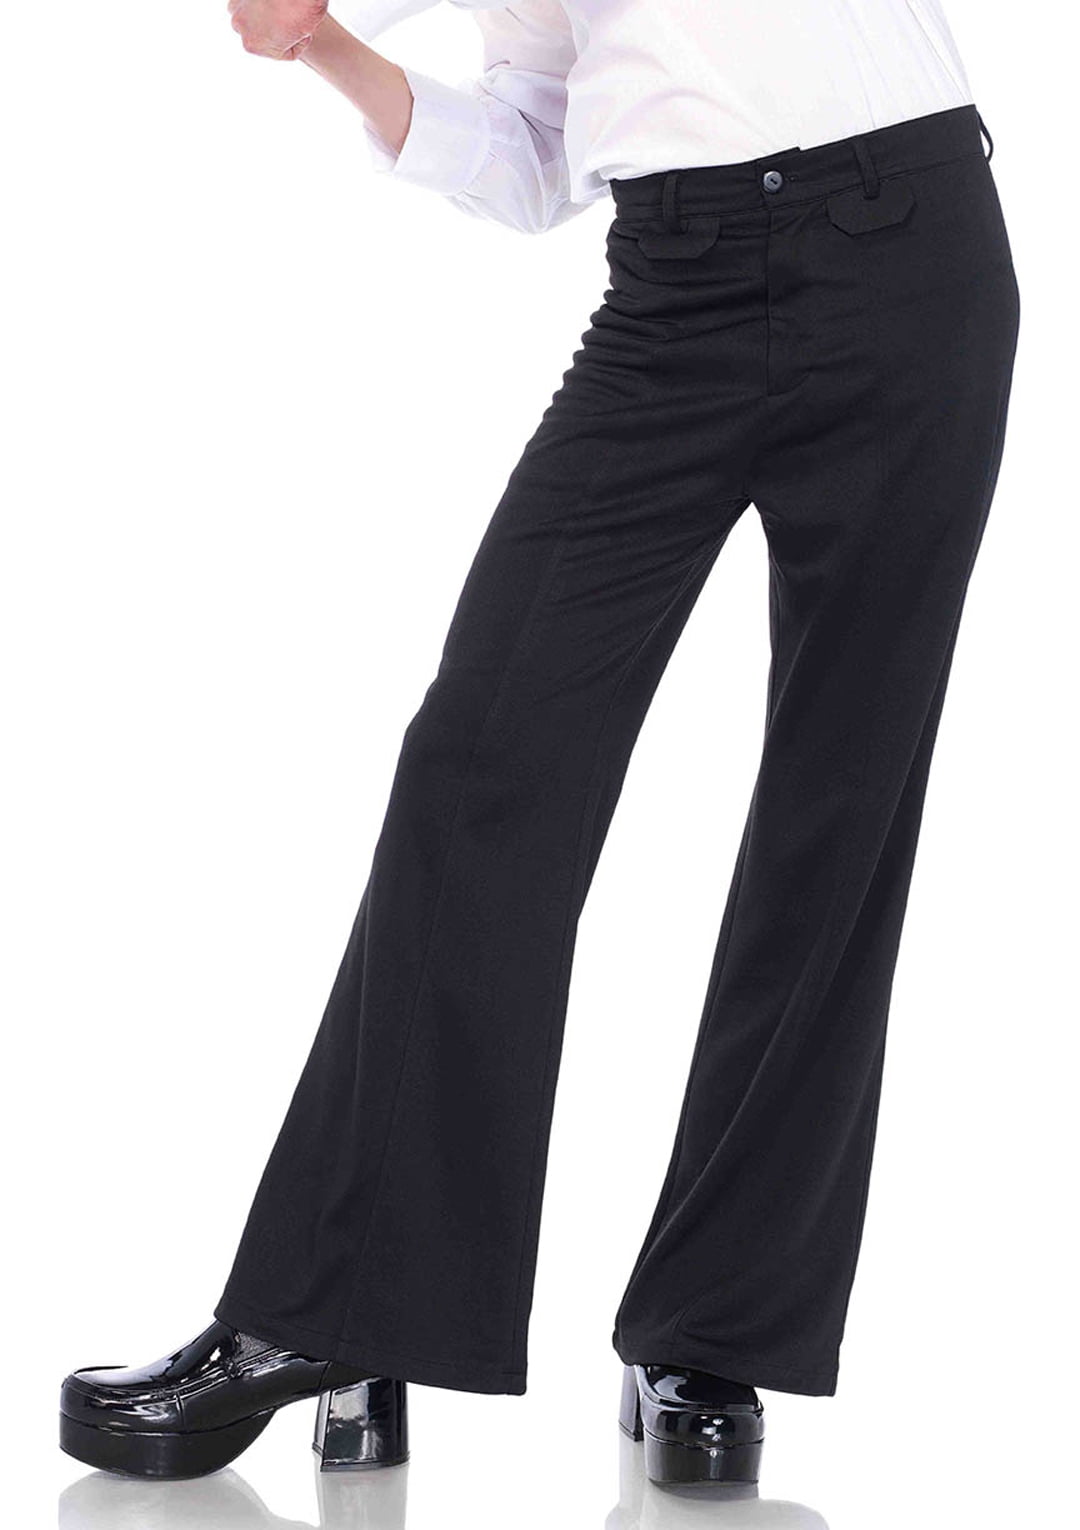 Black Disco Flared Pants  Costumes To Buy Perth